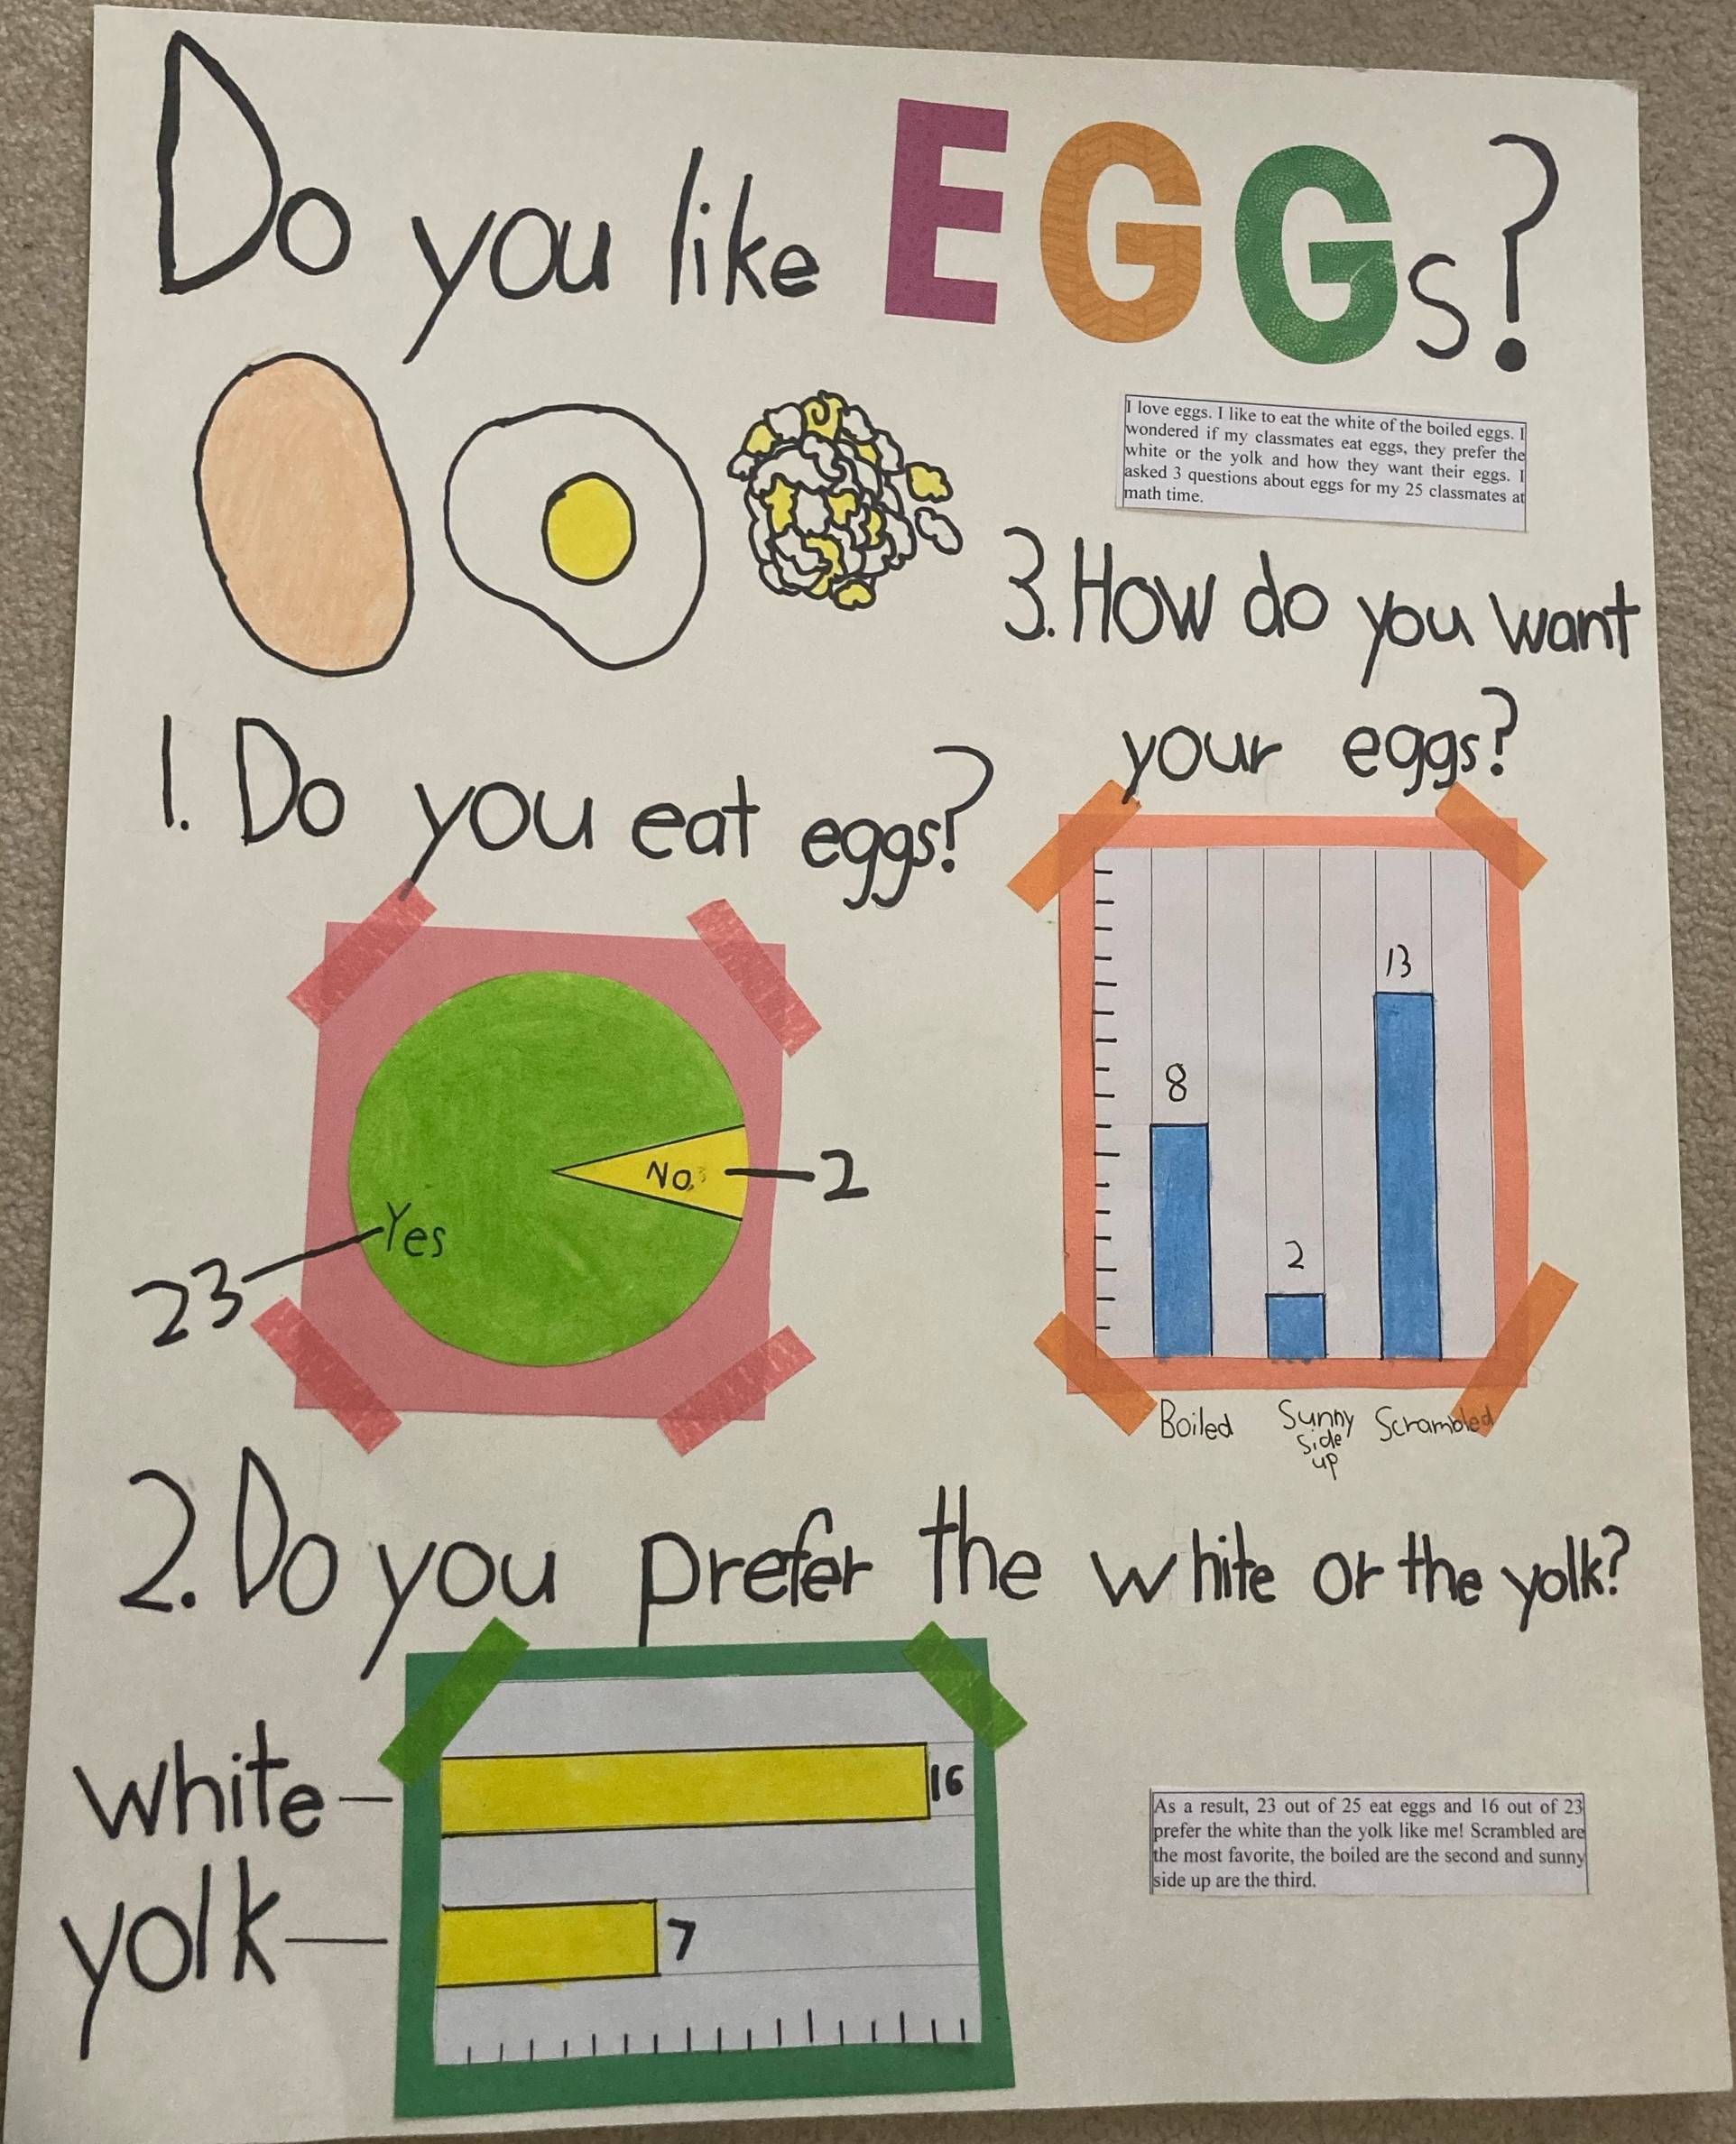 Example poster: Do you like eggs?